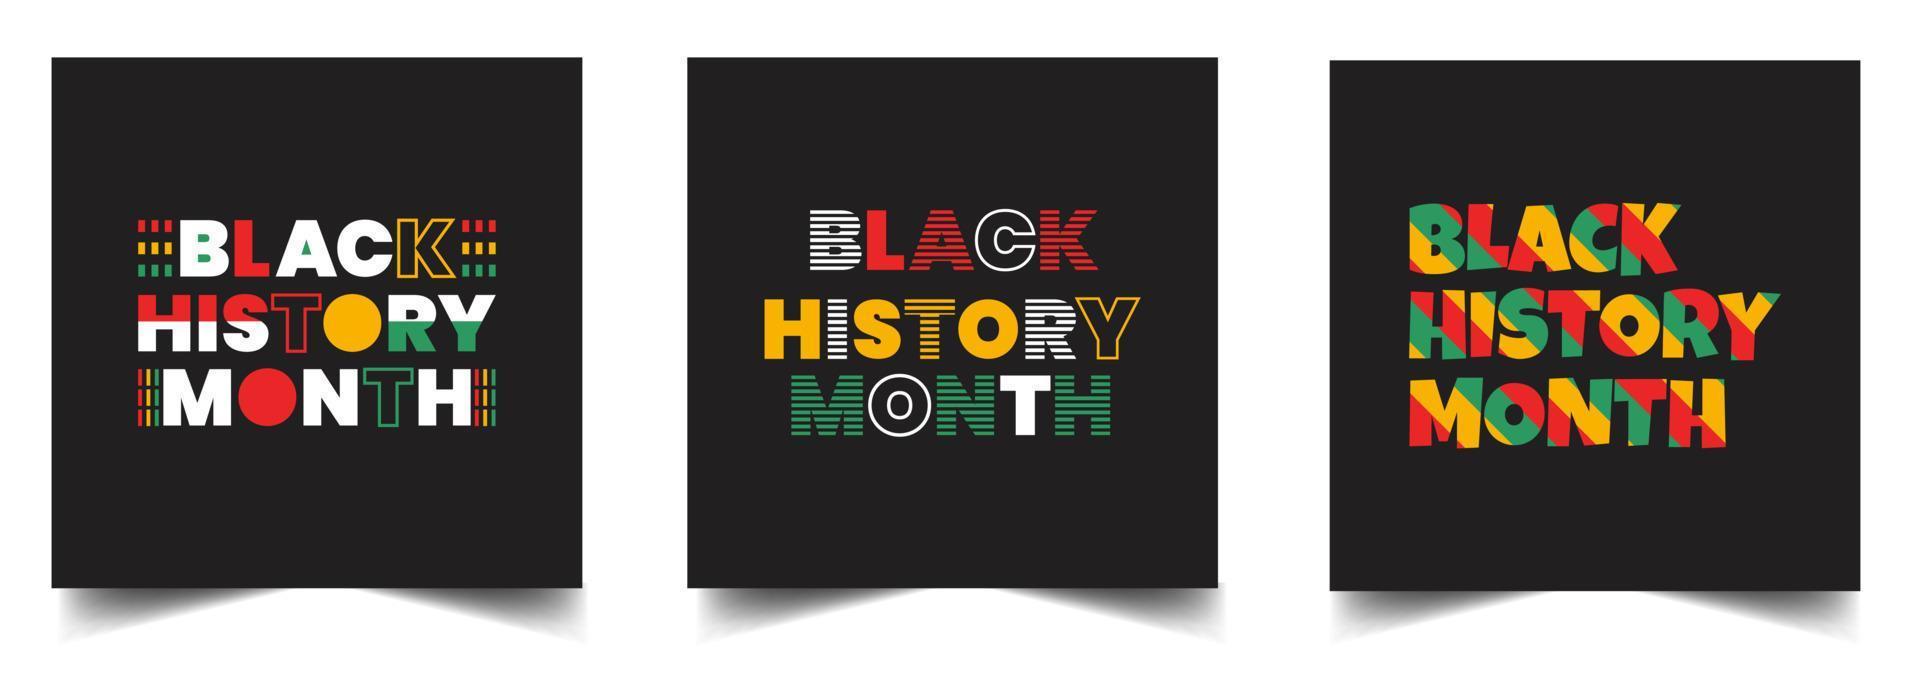 black history month typography text design background.  black history month social media post square banner design. Juneteenth Independence Day Background. Freedom or Emancipation day. text design. vector